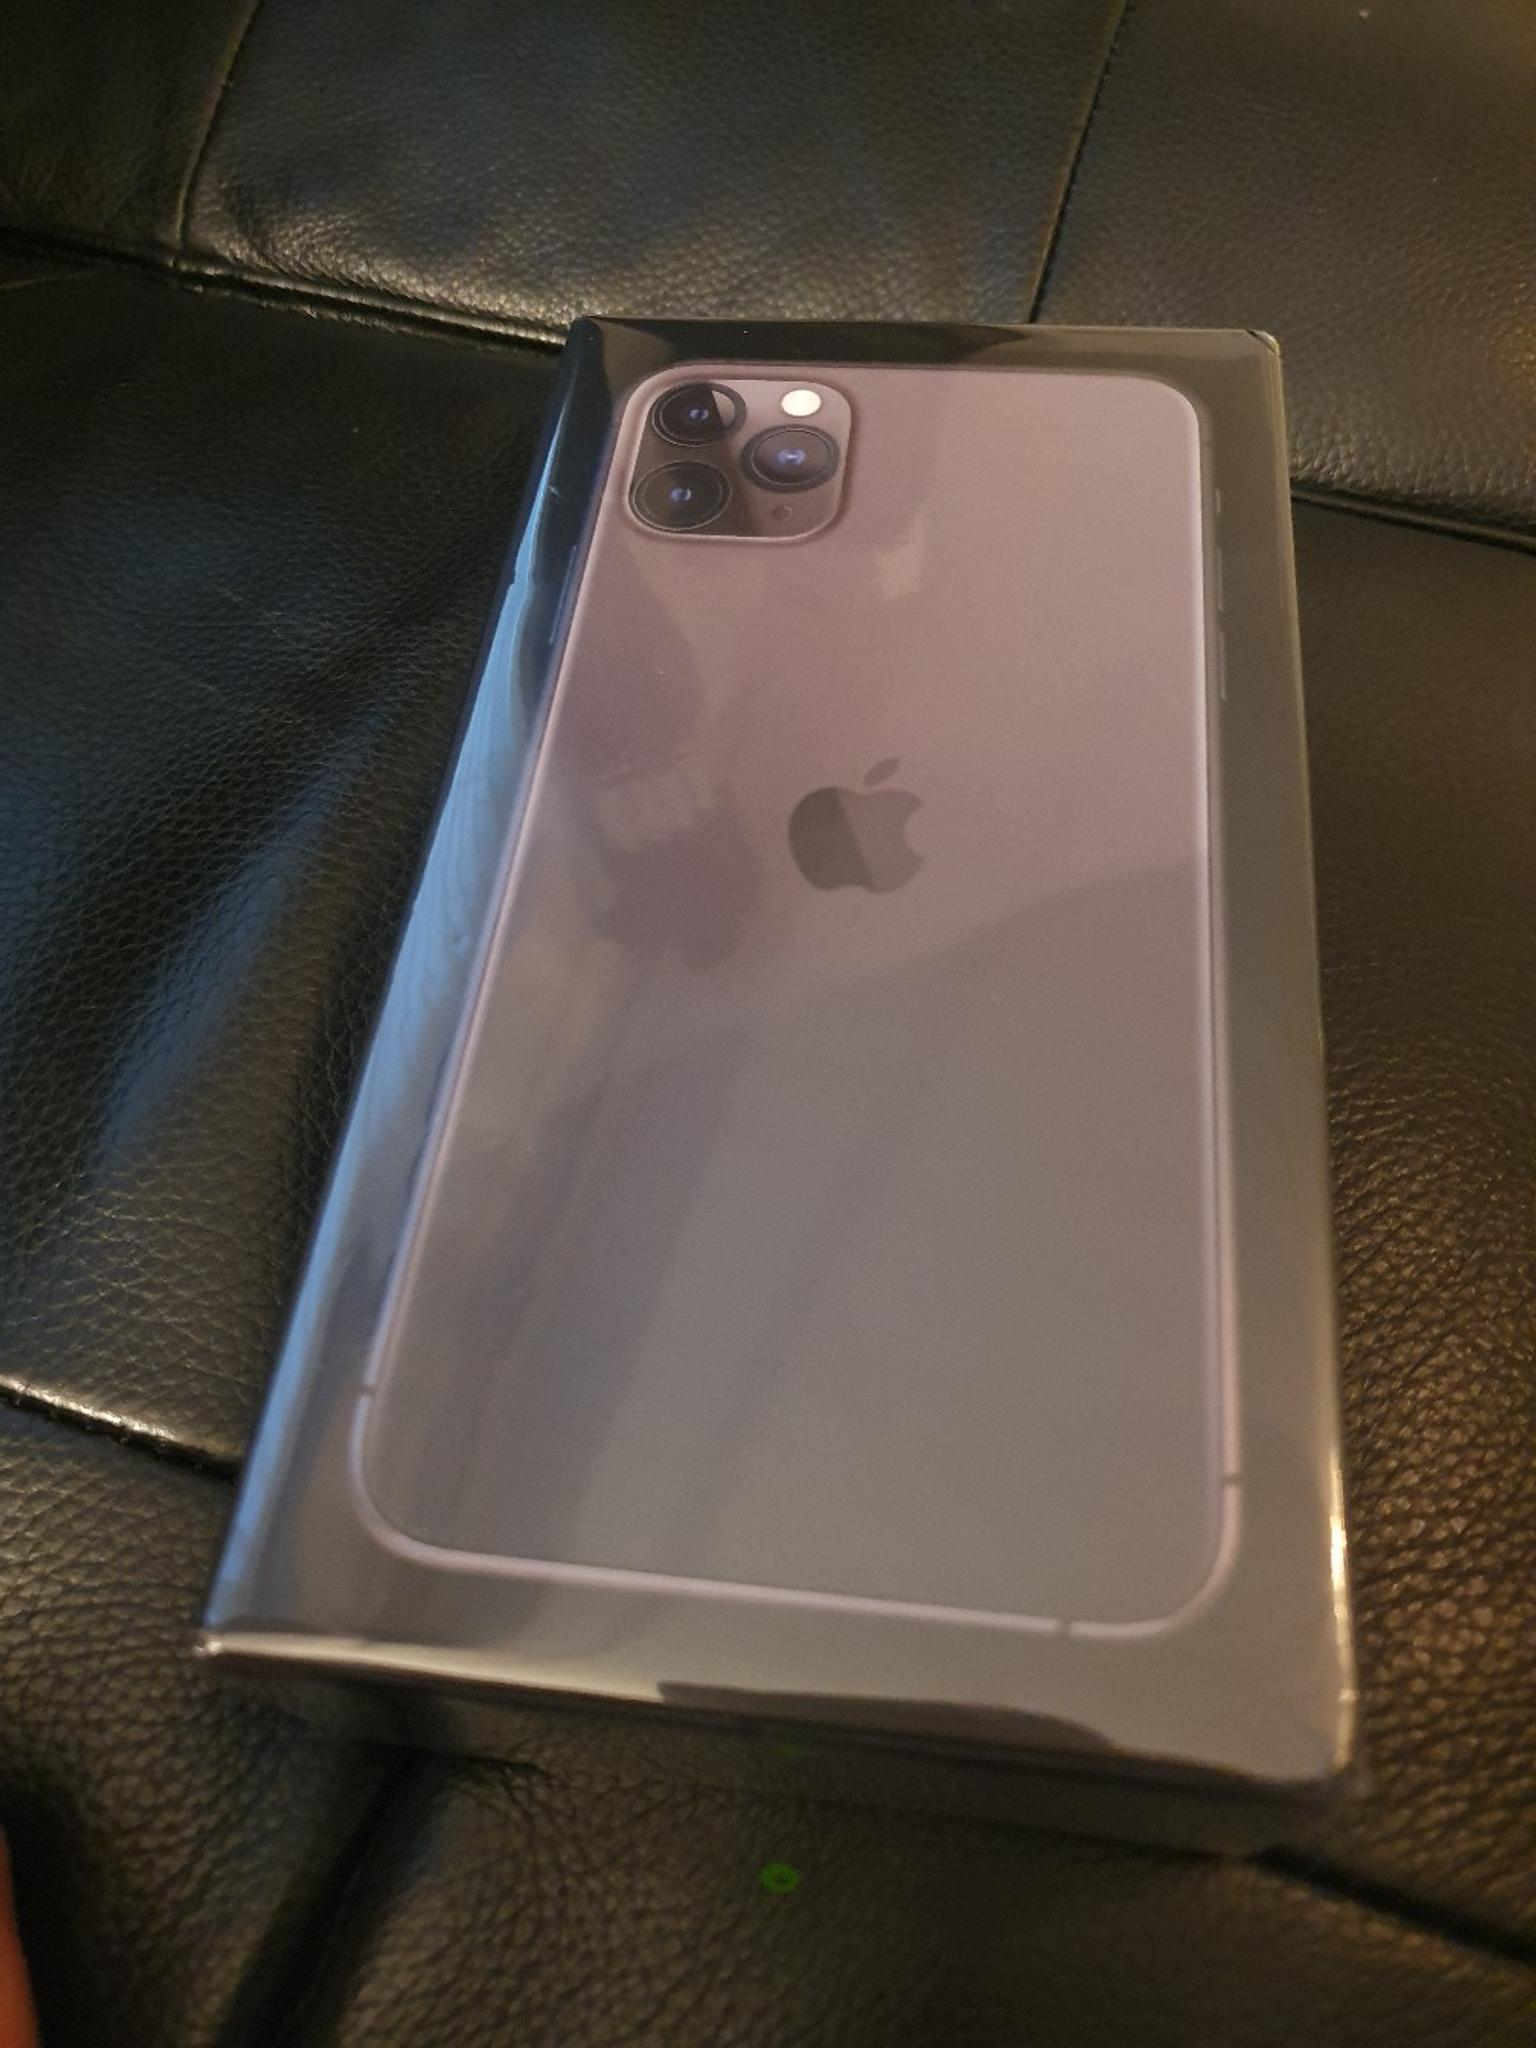 iPhone 11 pro Max 64gb Unlocked Space Grey in OL16 Rochdale for £1,049.00 for sale | Shpock